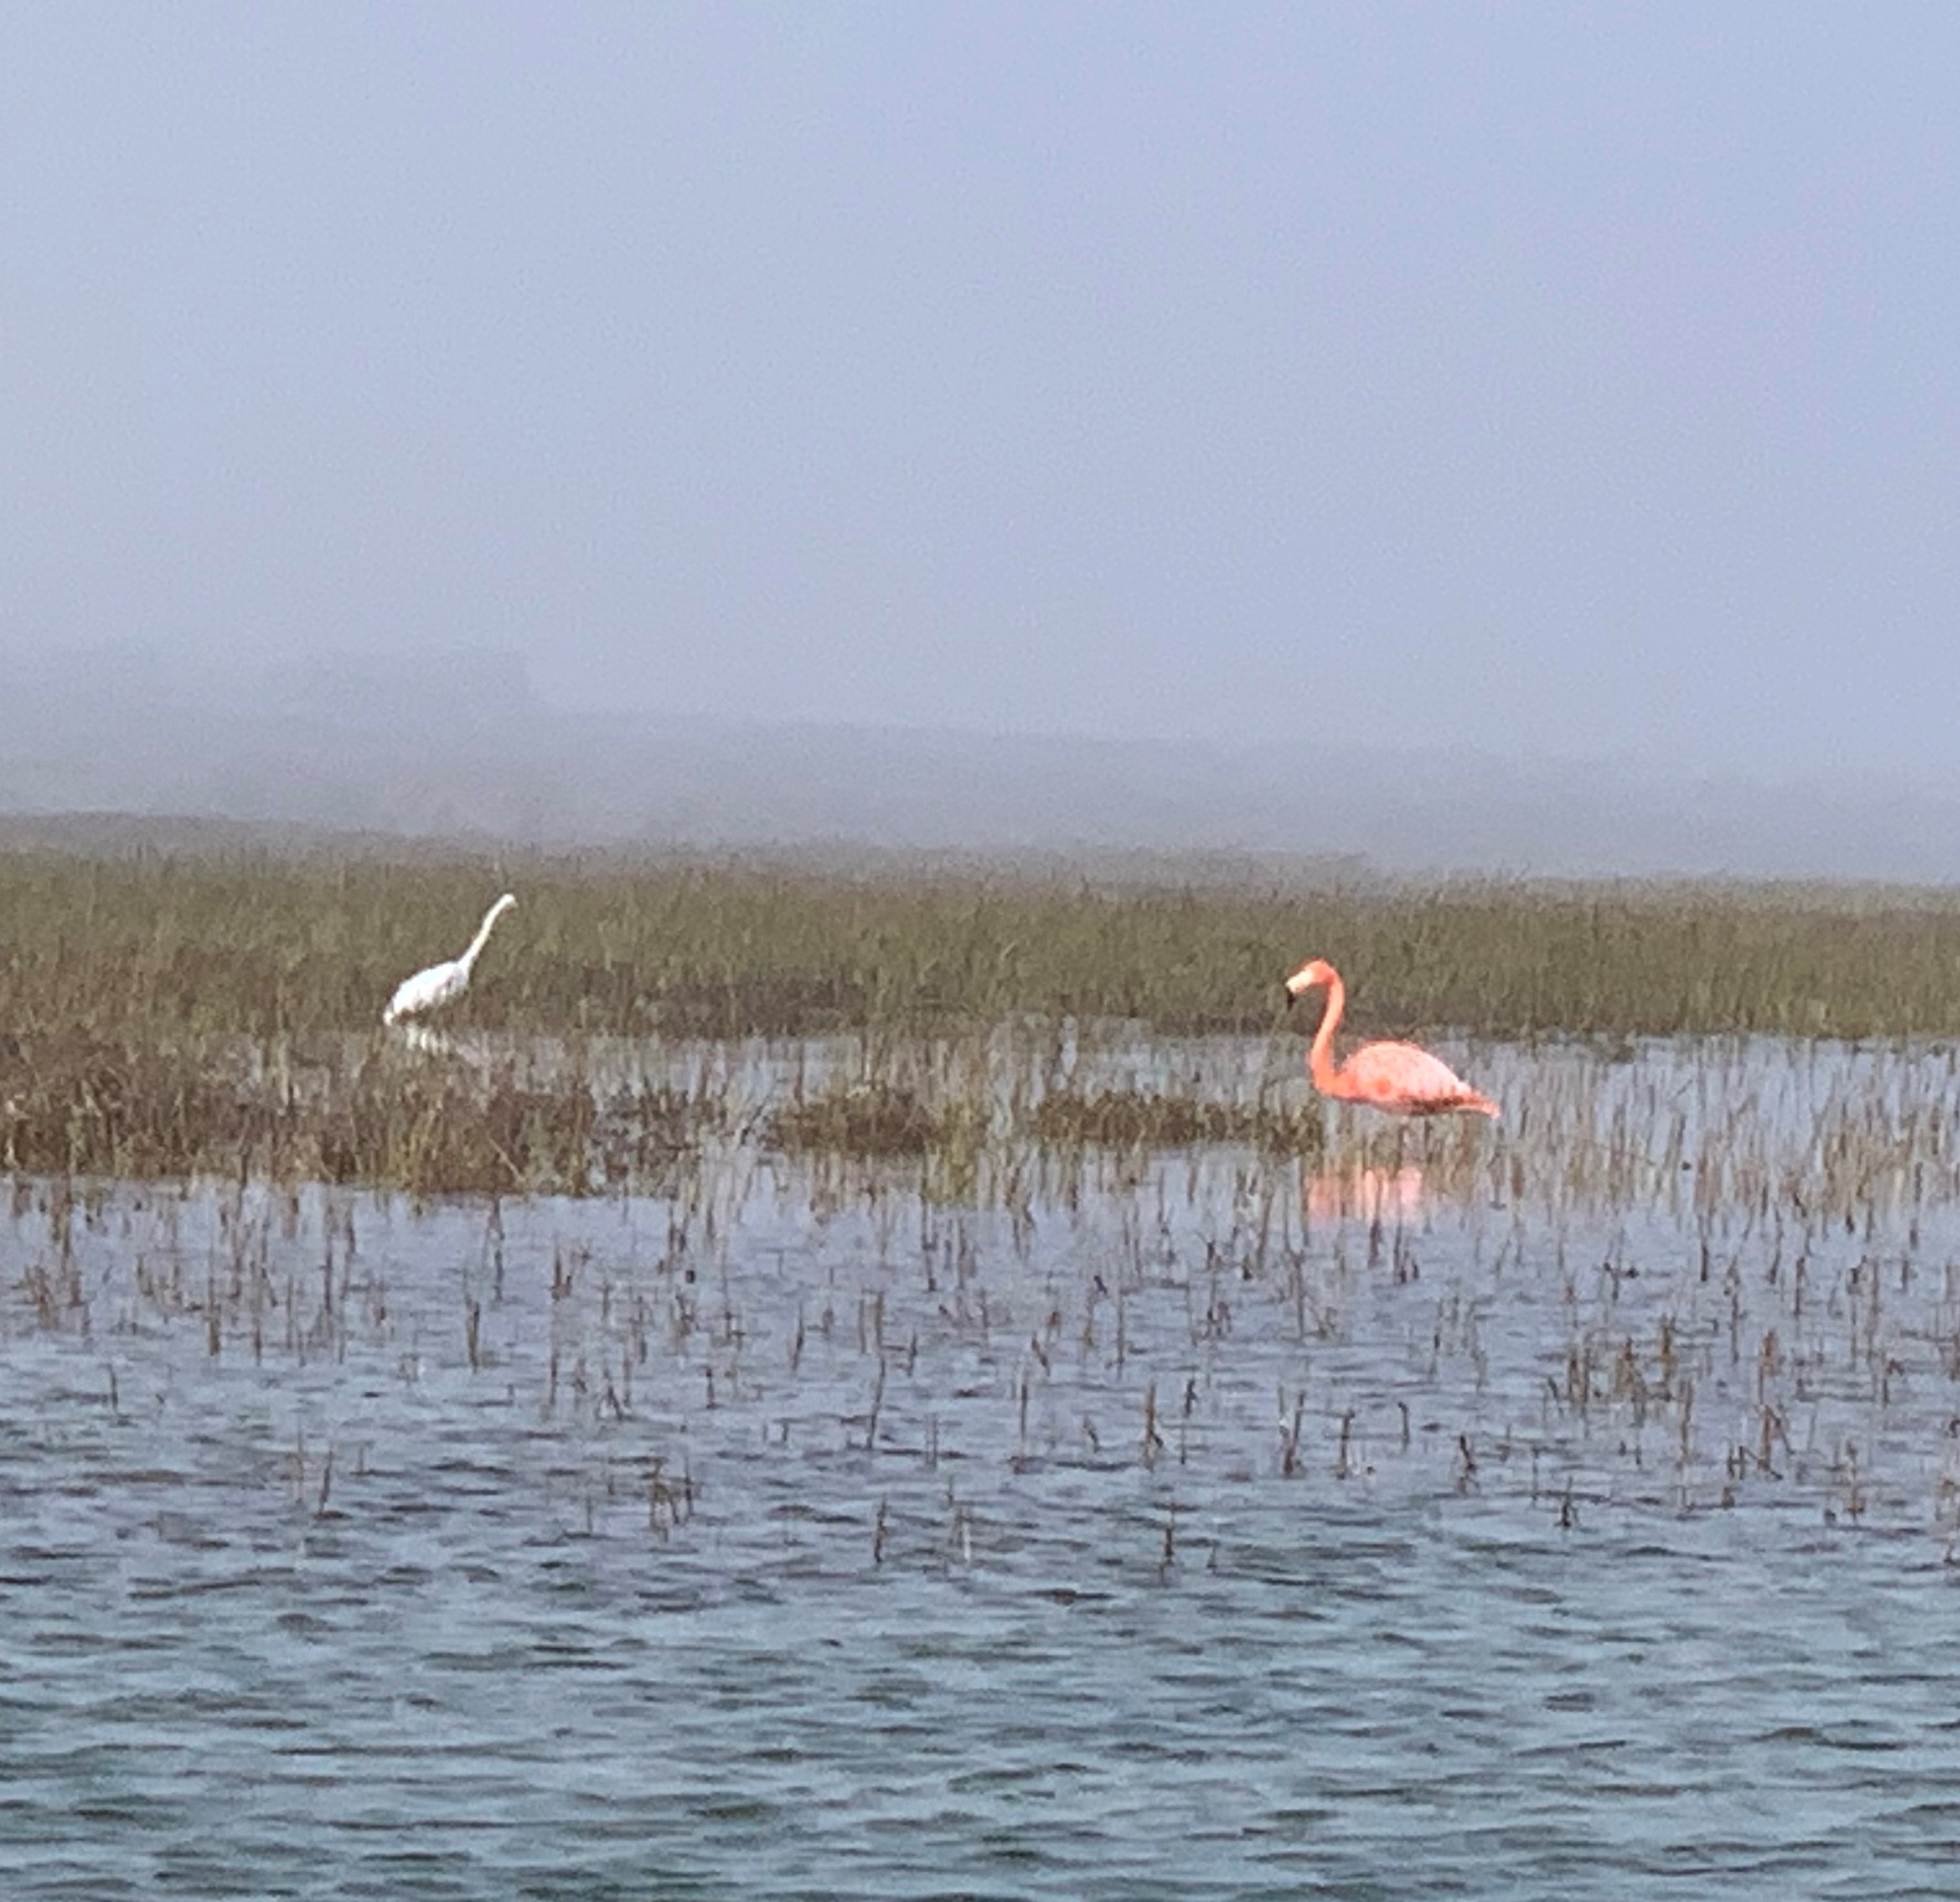 Did you know there are flamingos living in the wild in Coronado?